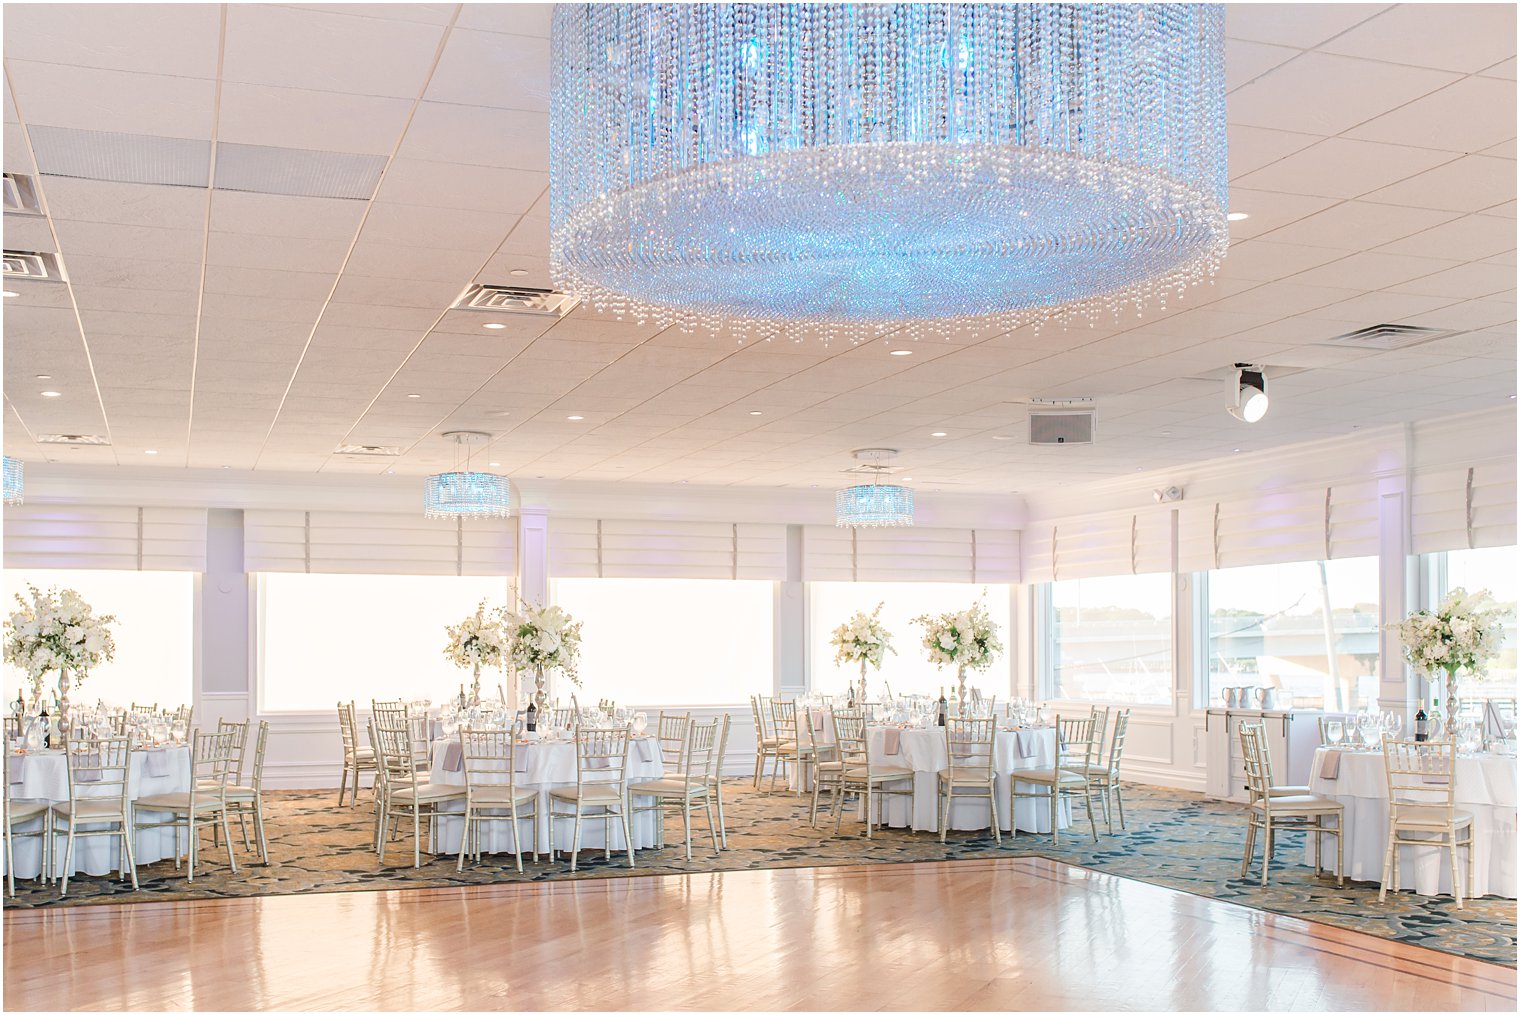 Crystal Point Yacht Club wedding reception with dance floor and blue chandelier